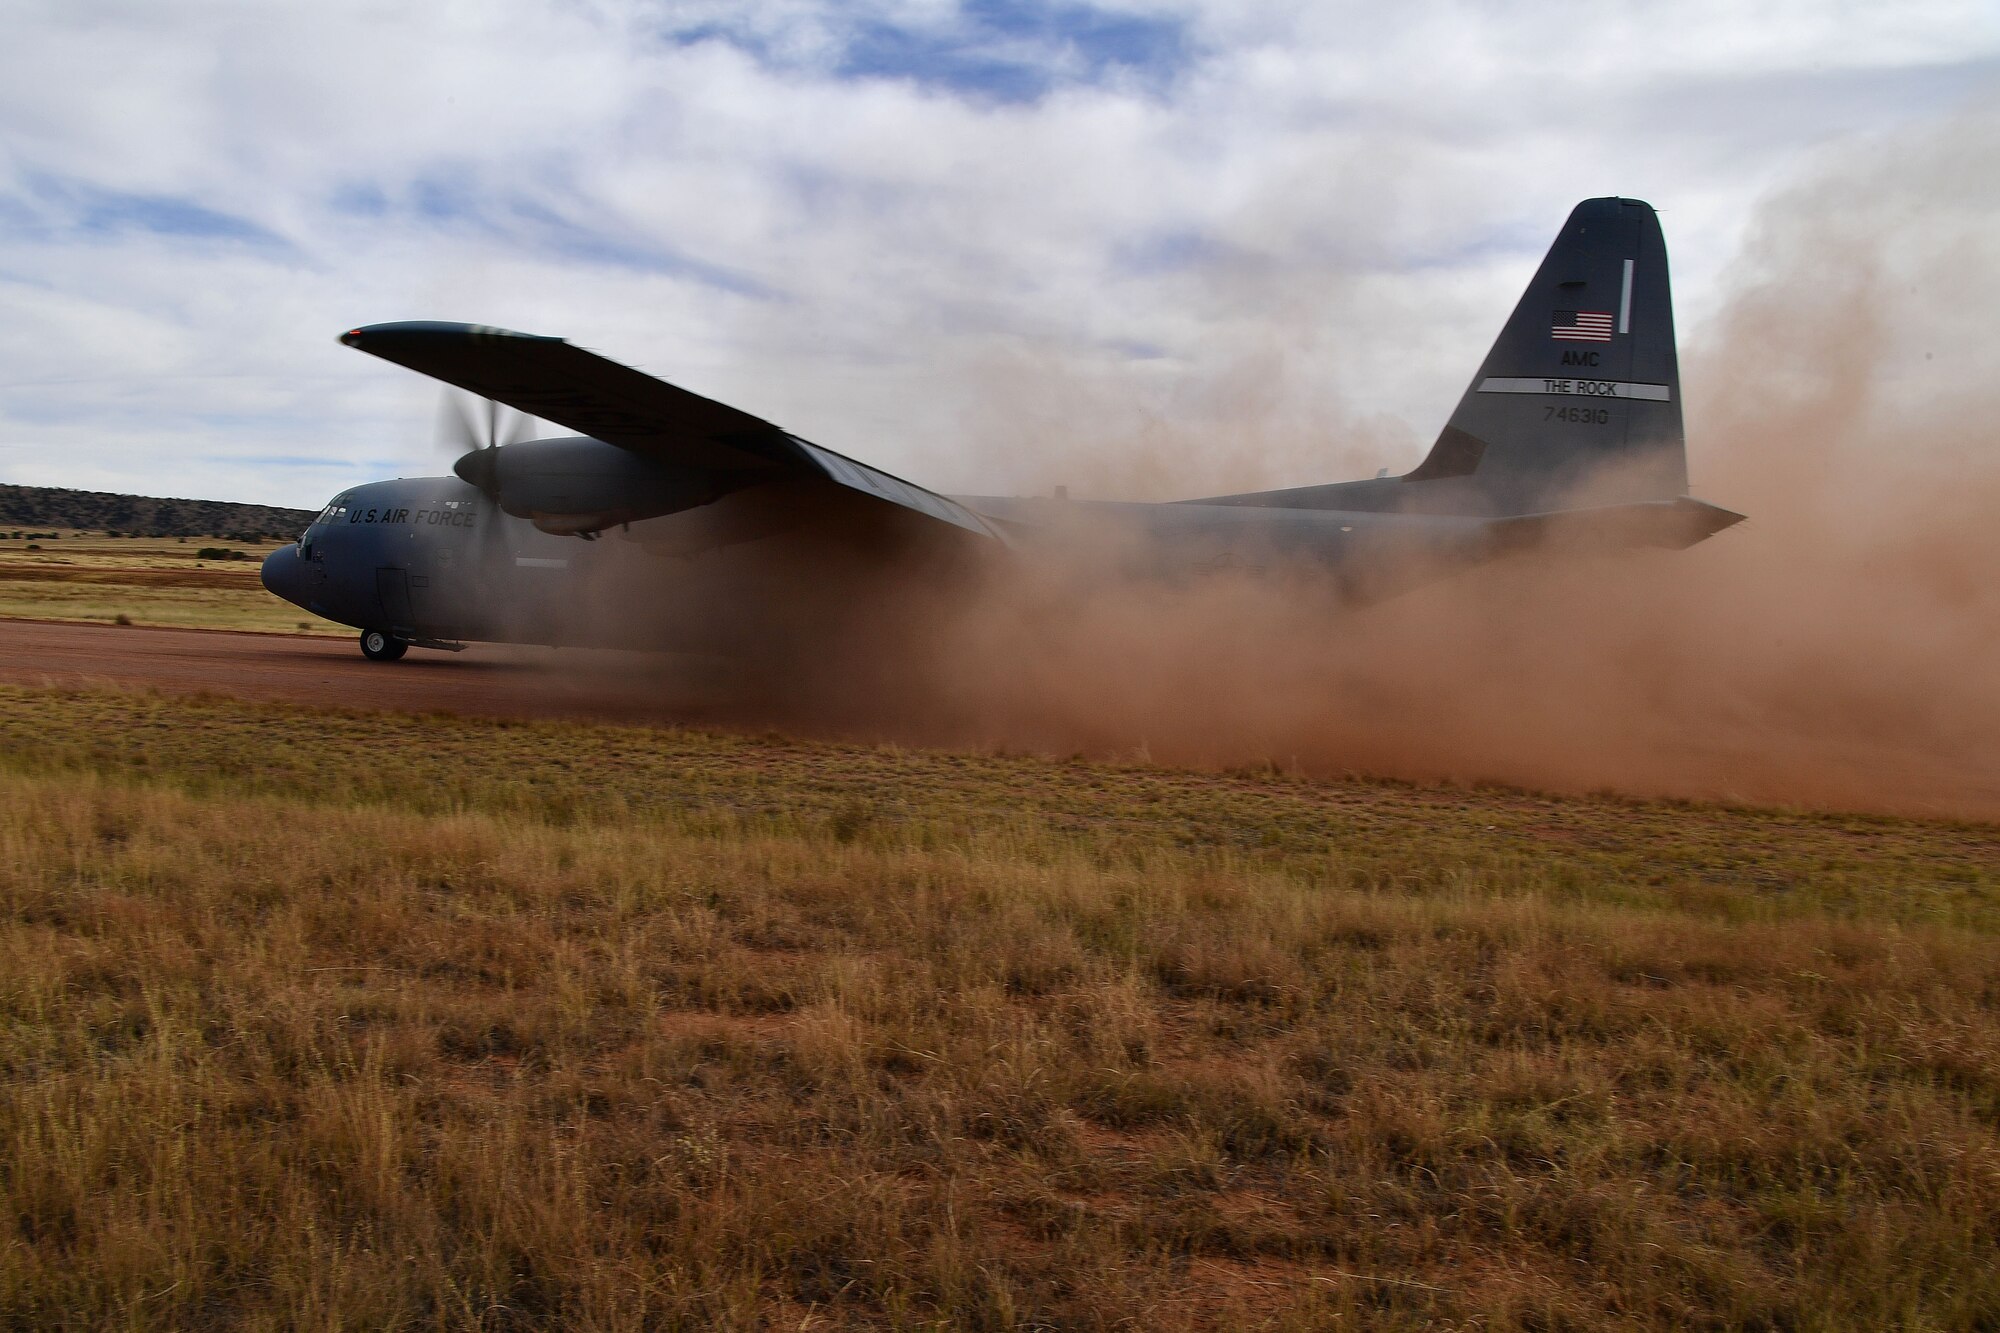 A C-130 prepares for ttakeoff on a dirt runway.